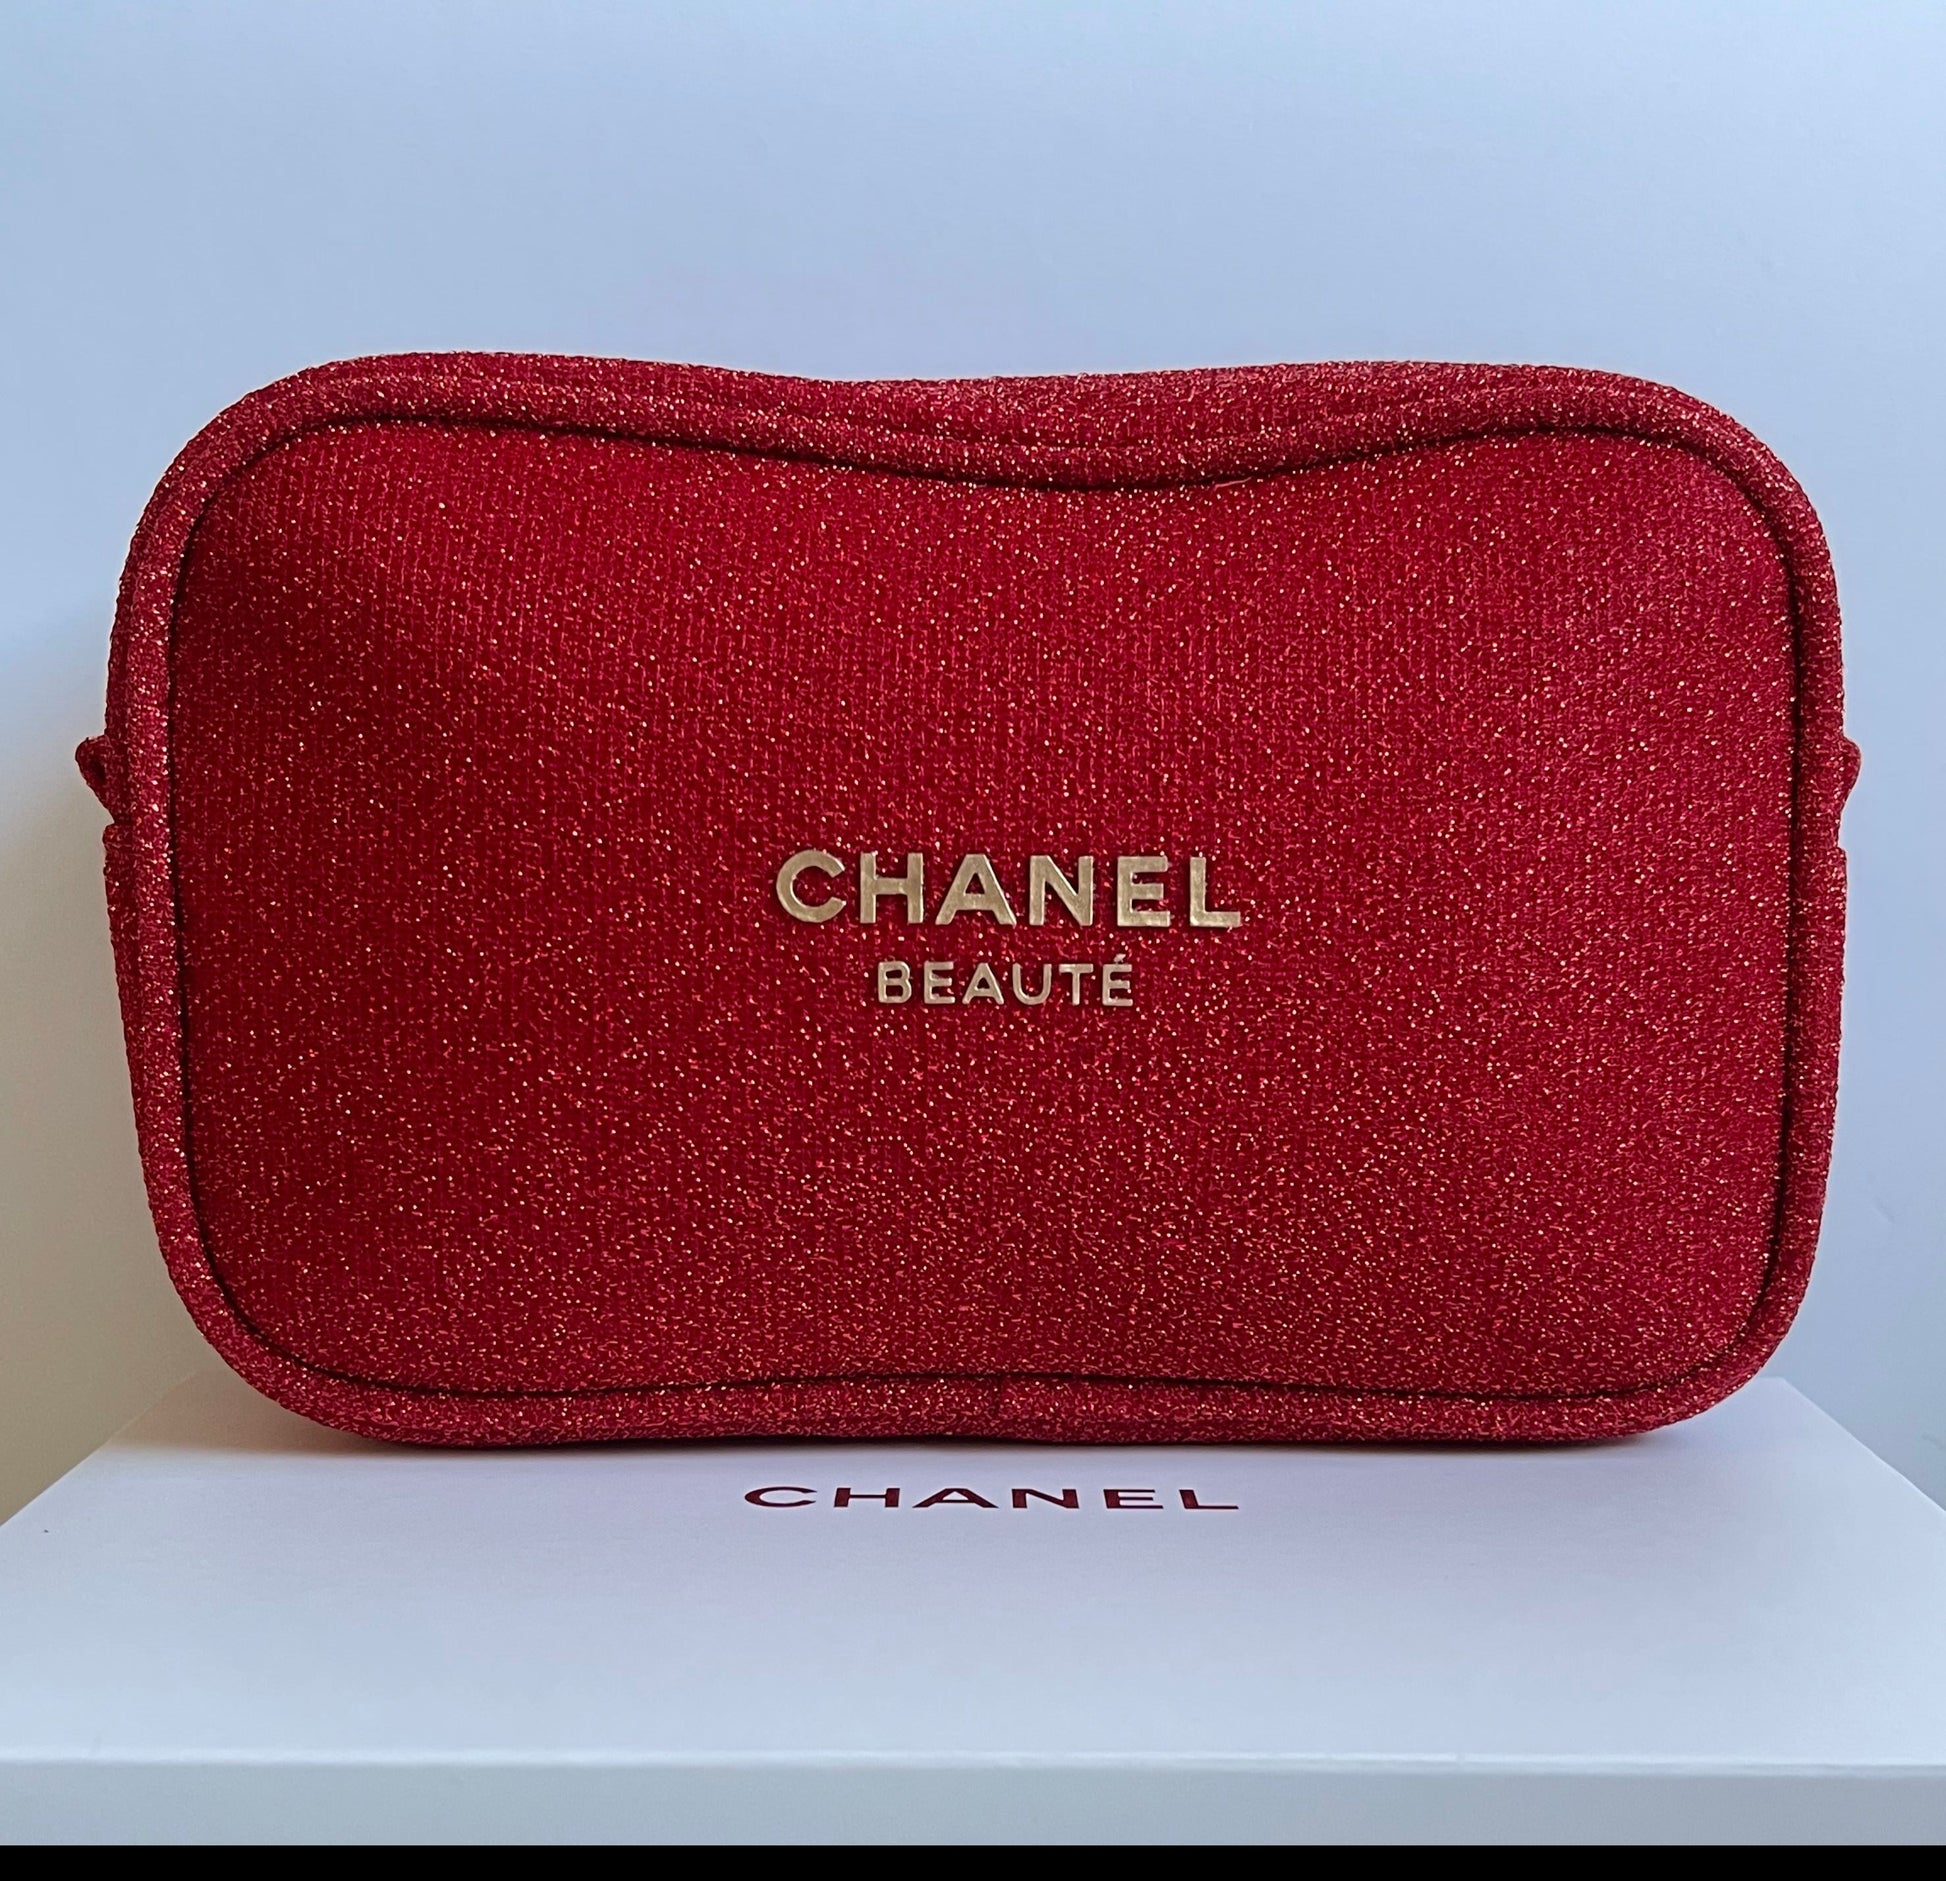 Chanel Toiletry Cosmetic Bag Makeup Lipstick Bag Clutch Red Velvet Coin  Pouch